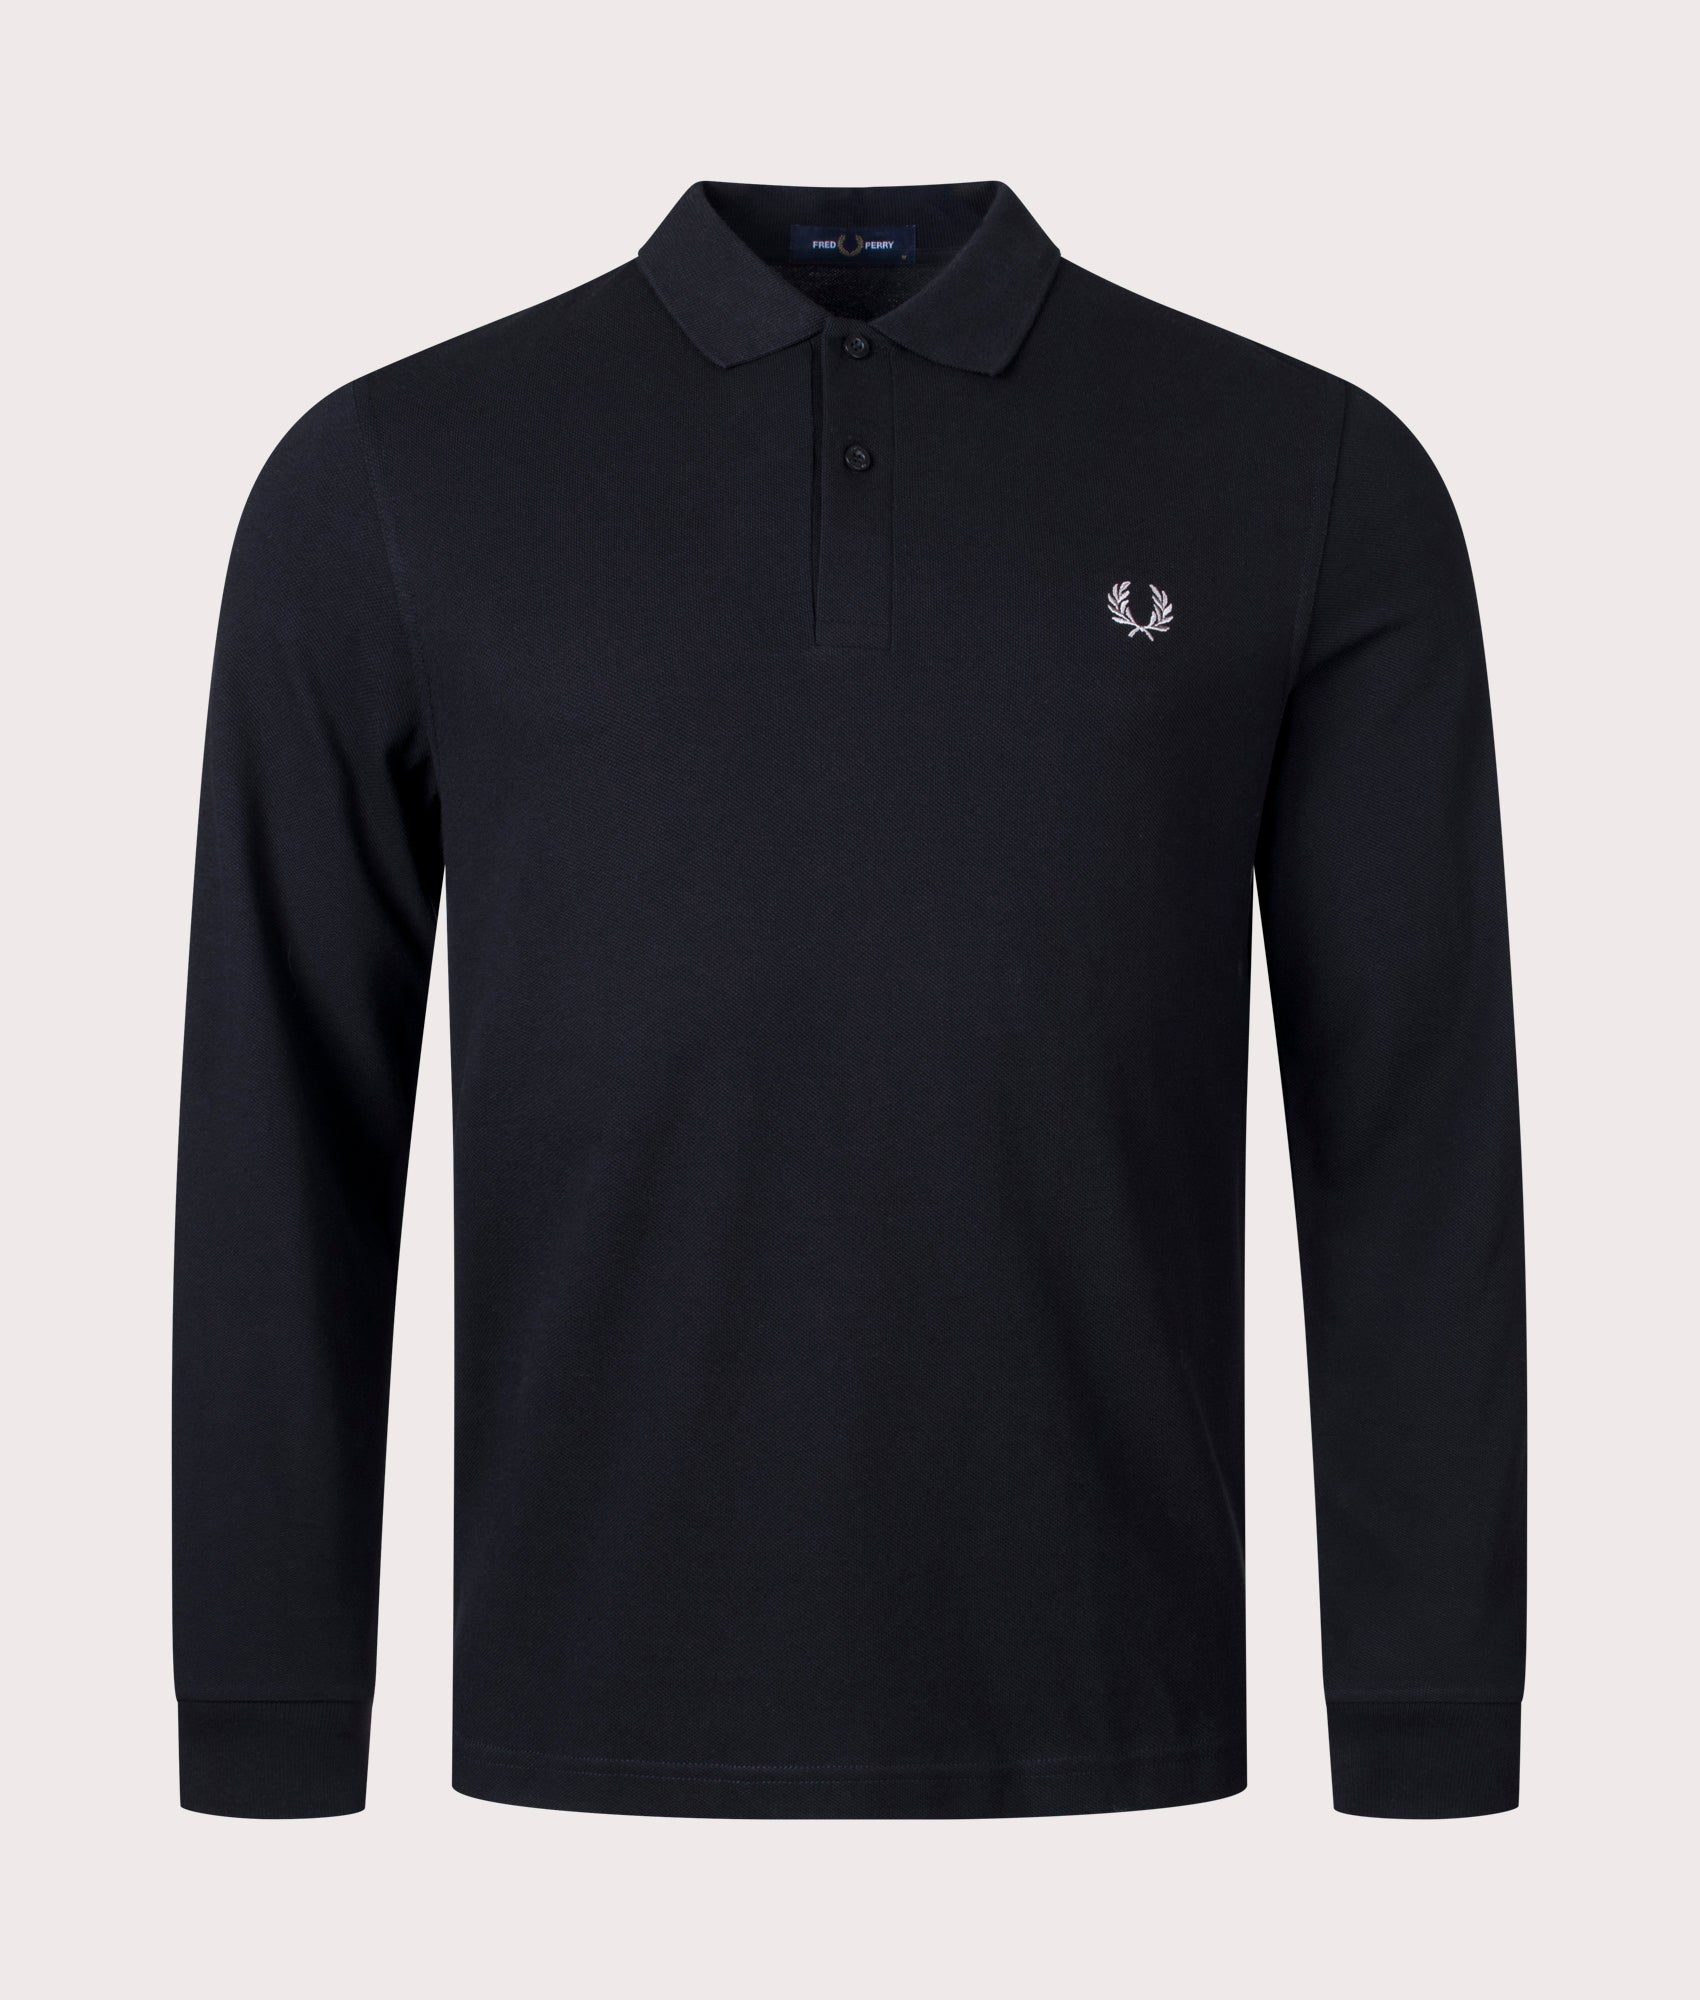 Fred Perry Mens Long Sleeve Fred Perry Tennis Polo Shirt - Colour: 906 Black/Chrome - Size: Large